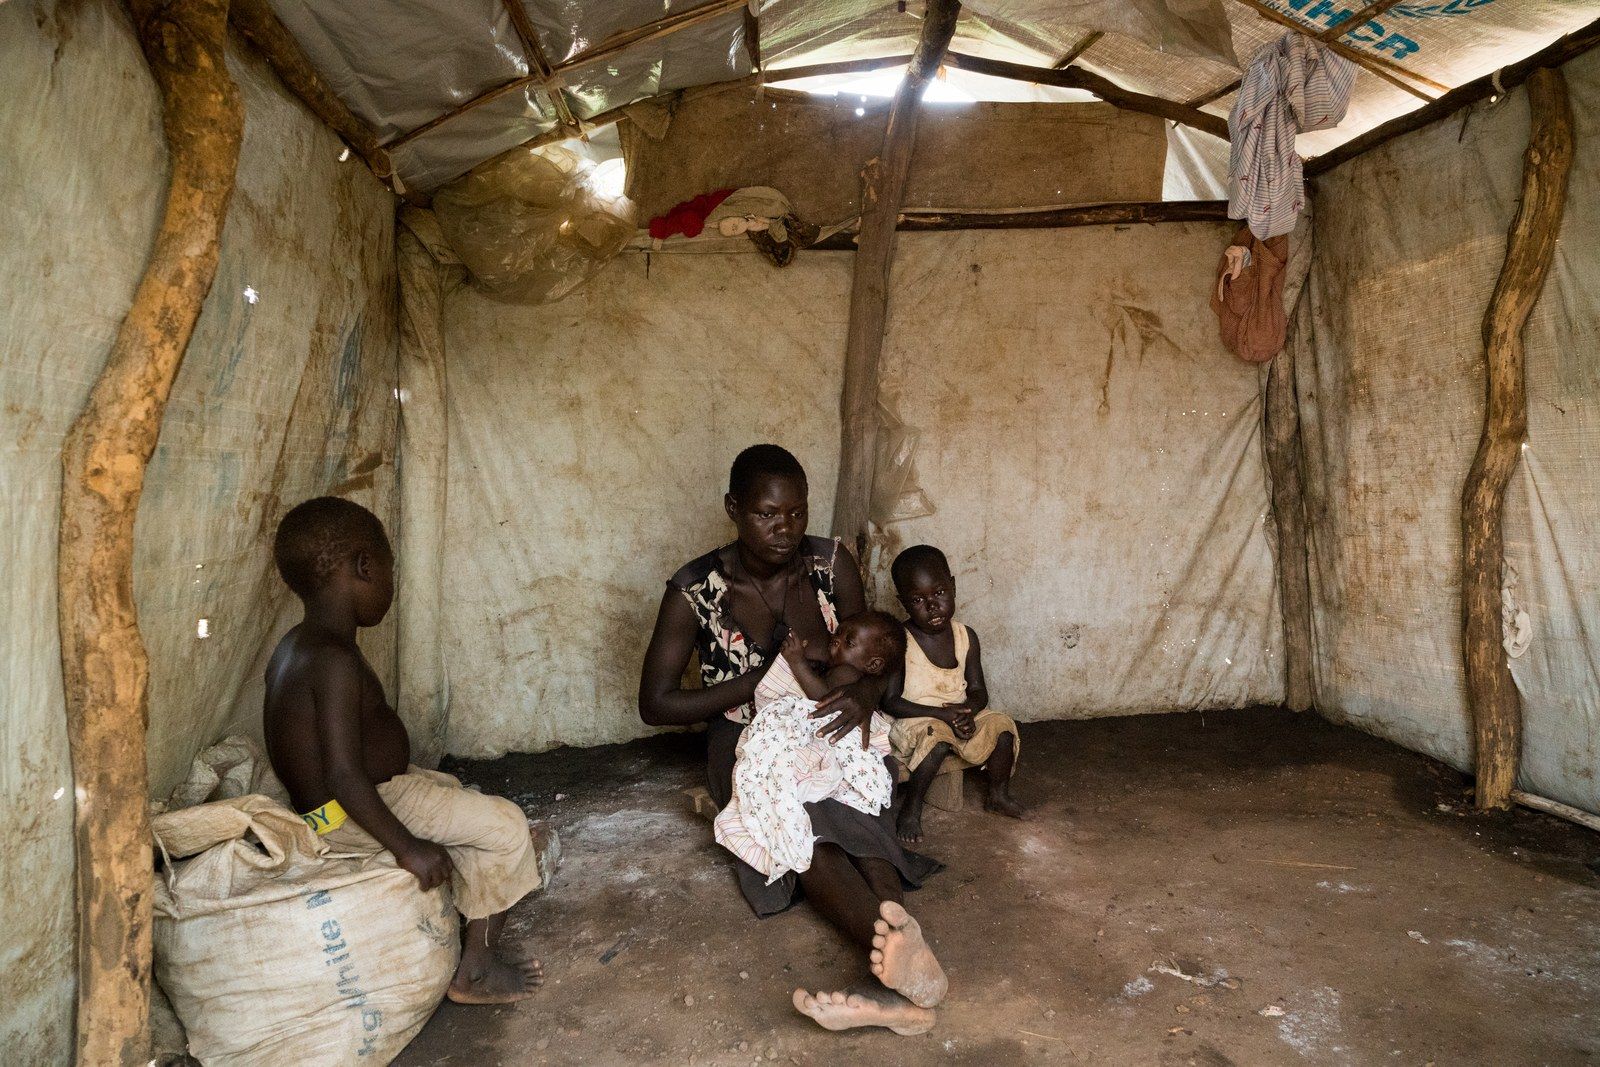 Filda Ayet, age 23, with her three children, Bosco, 5, Winnie, 3, and 3-month-old Peter in their home in a settlement for refugees that have fled from South Sudan to Uganda, June 25, 2019. Image by Adriane Ohanesian. Uganda, 2019.